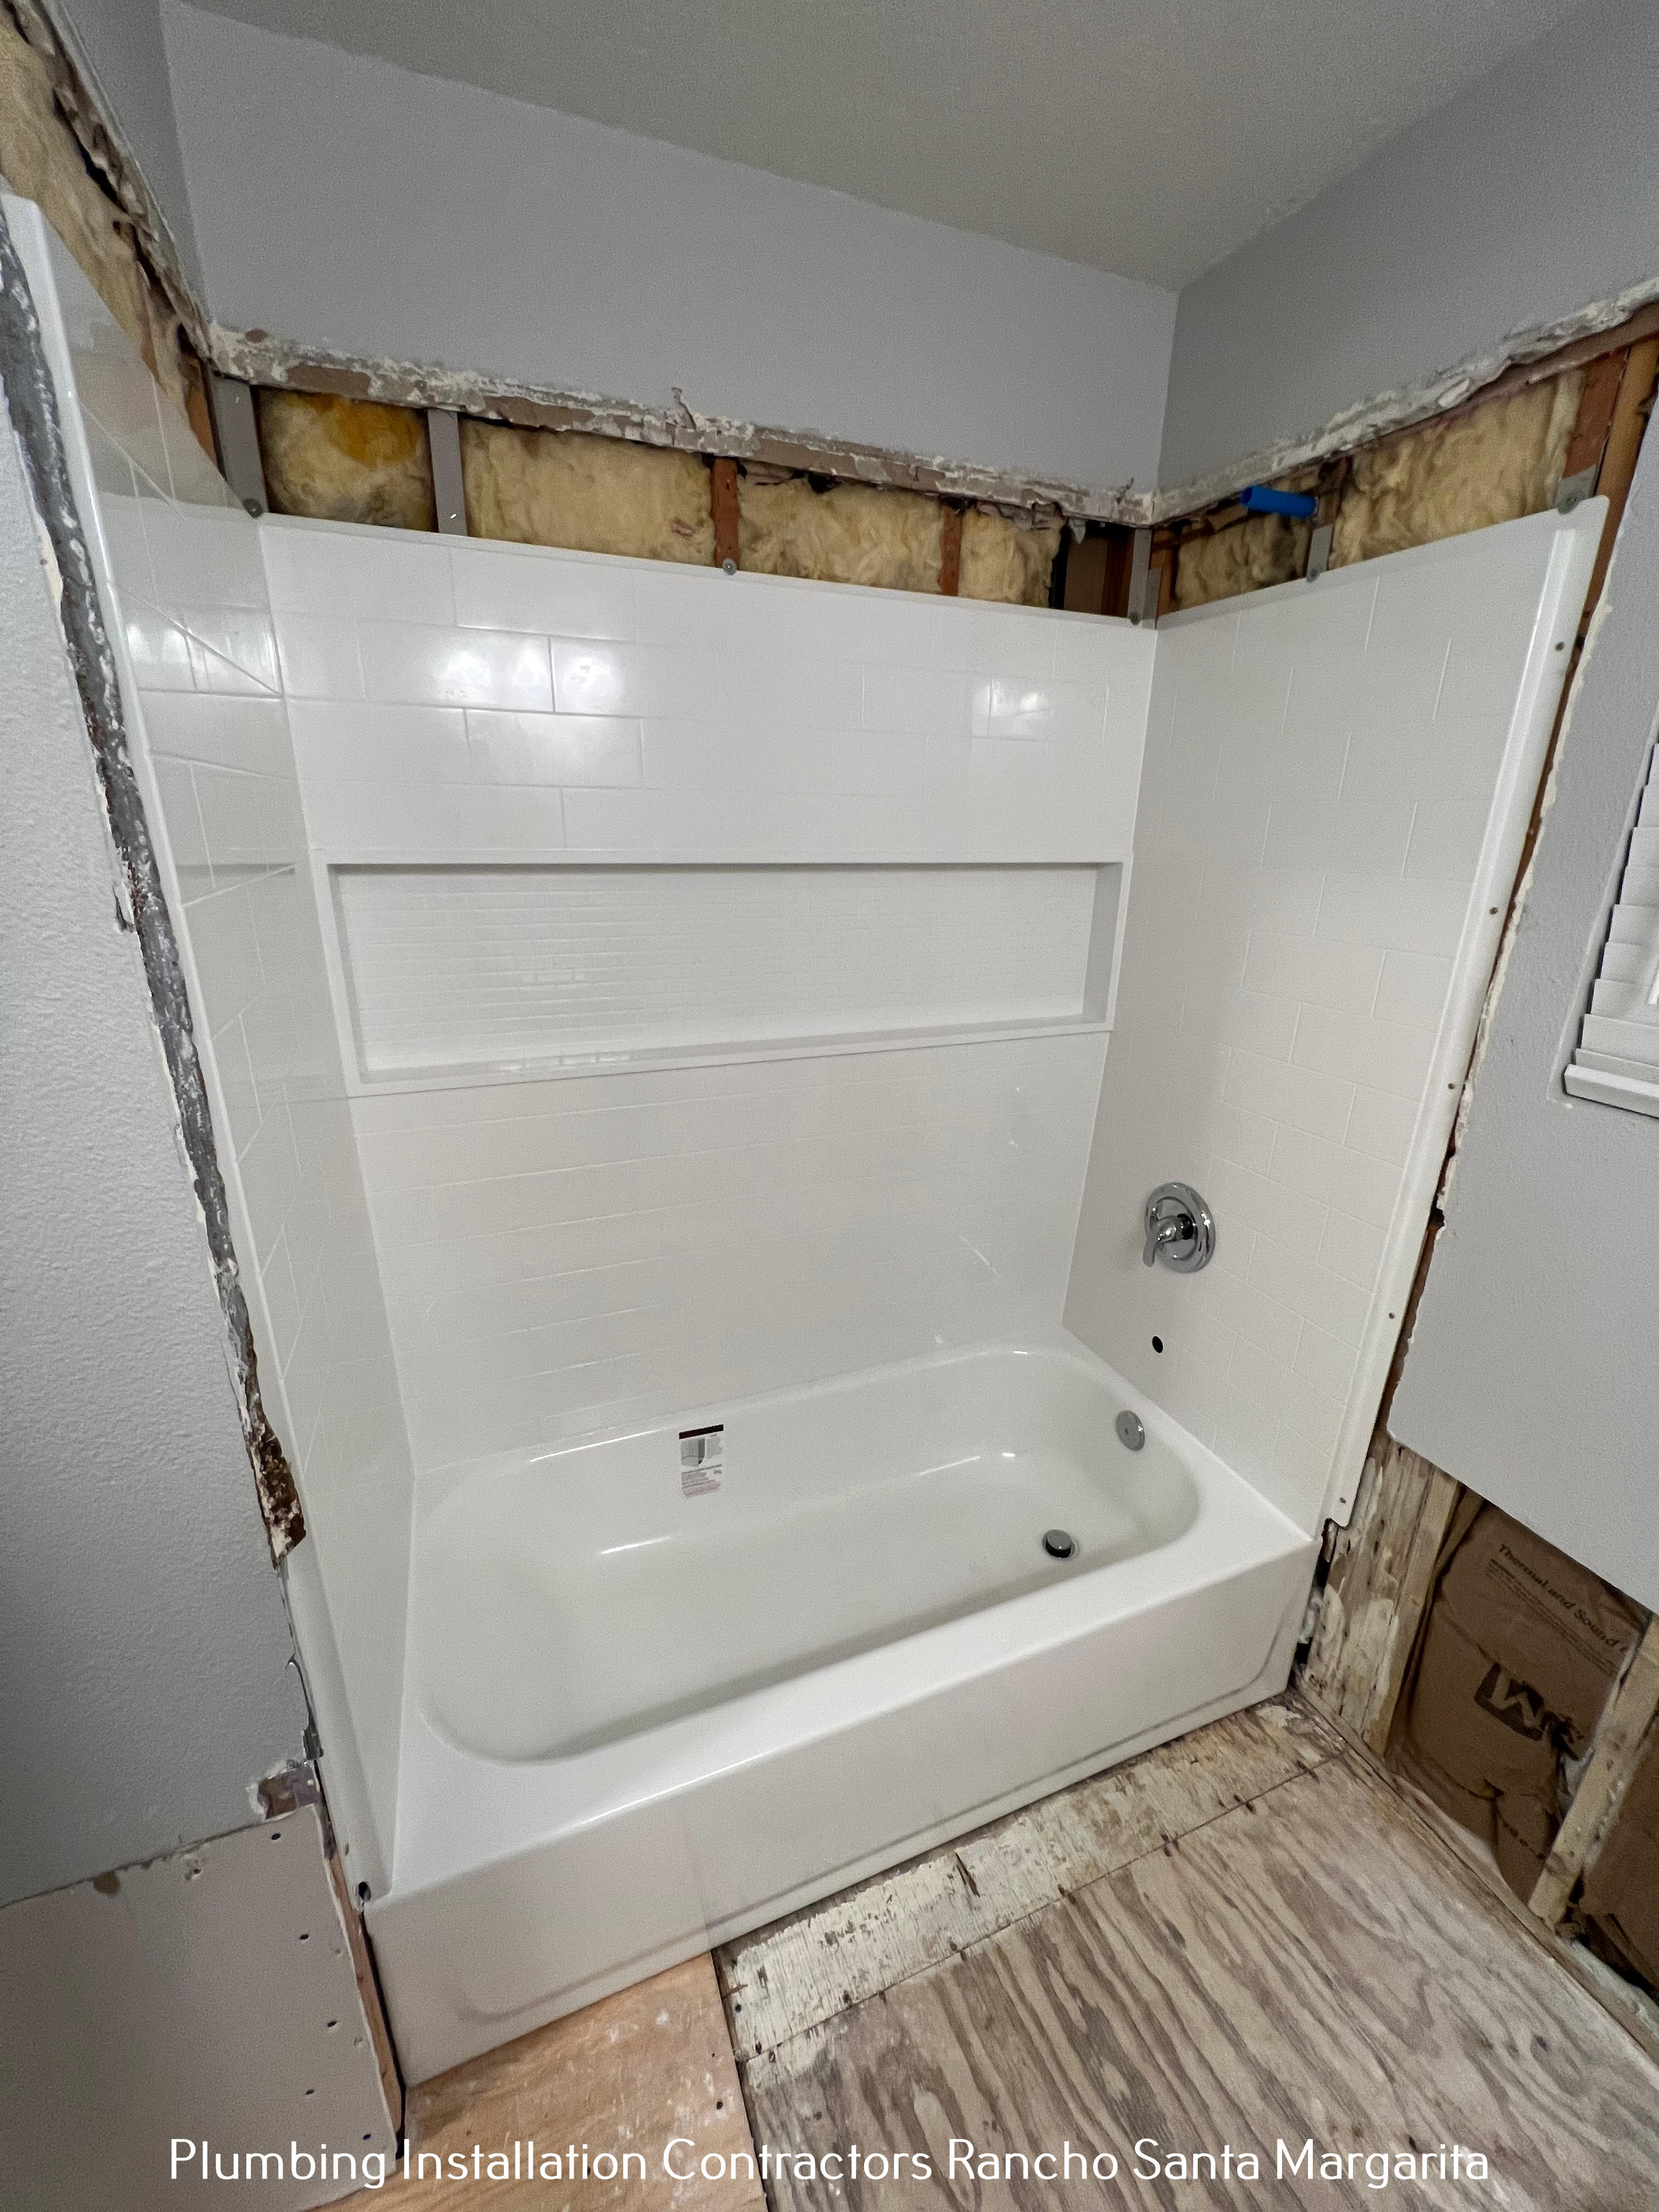 Integrity Plumbing Highlights Top Safety Measures for Residential Plumbing